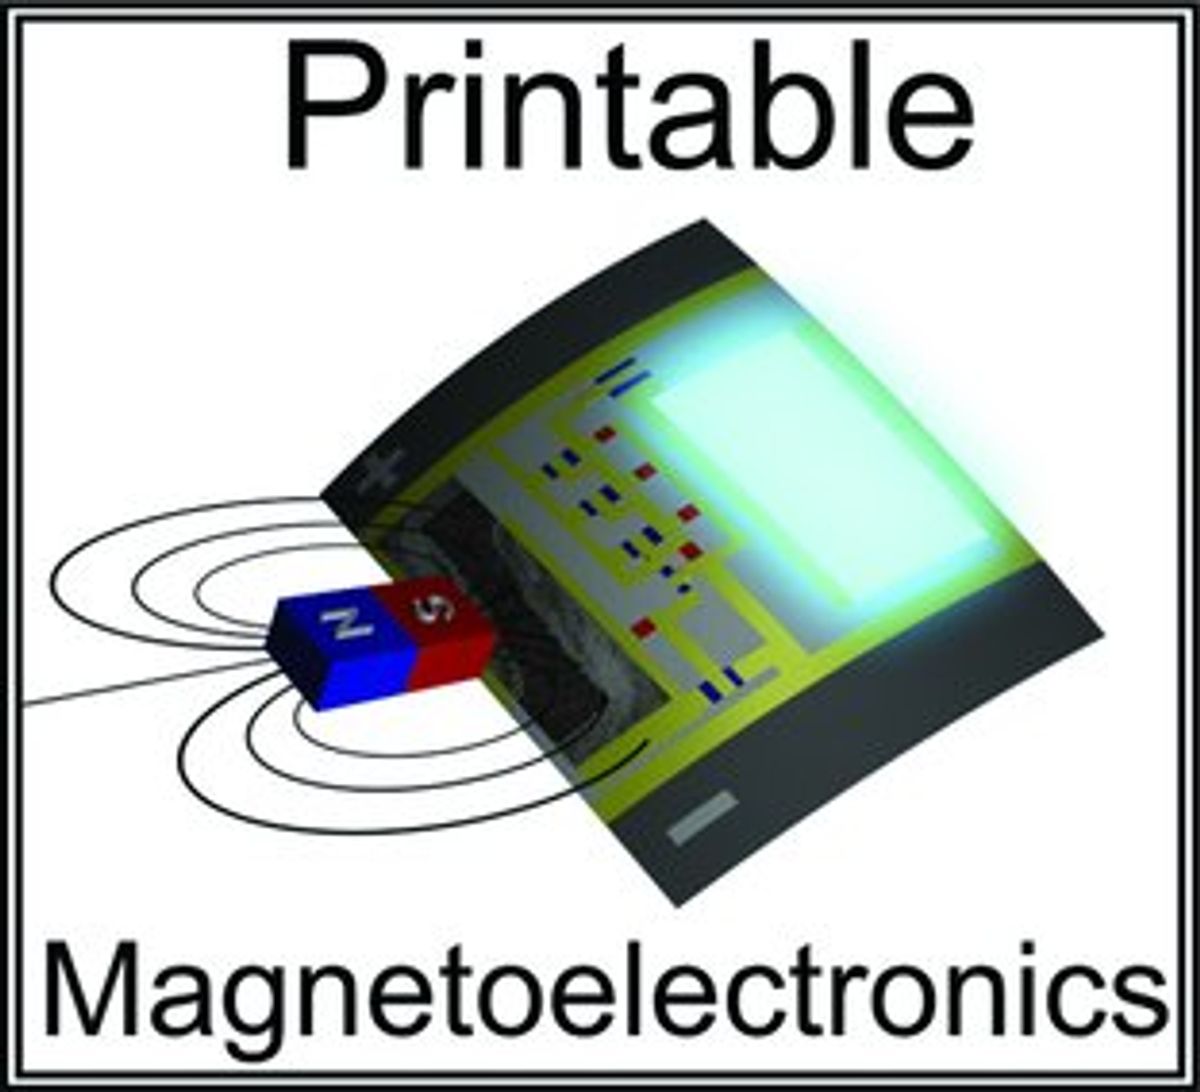 The First Printable Giant Magnetoresistive Devices Emerge